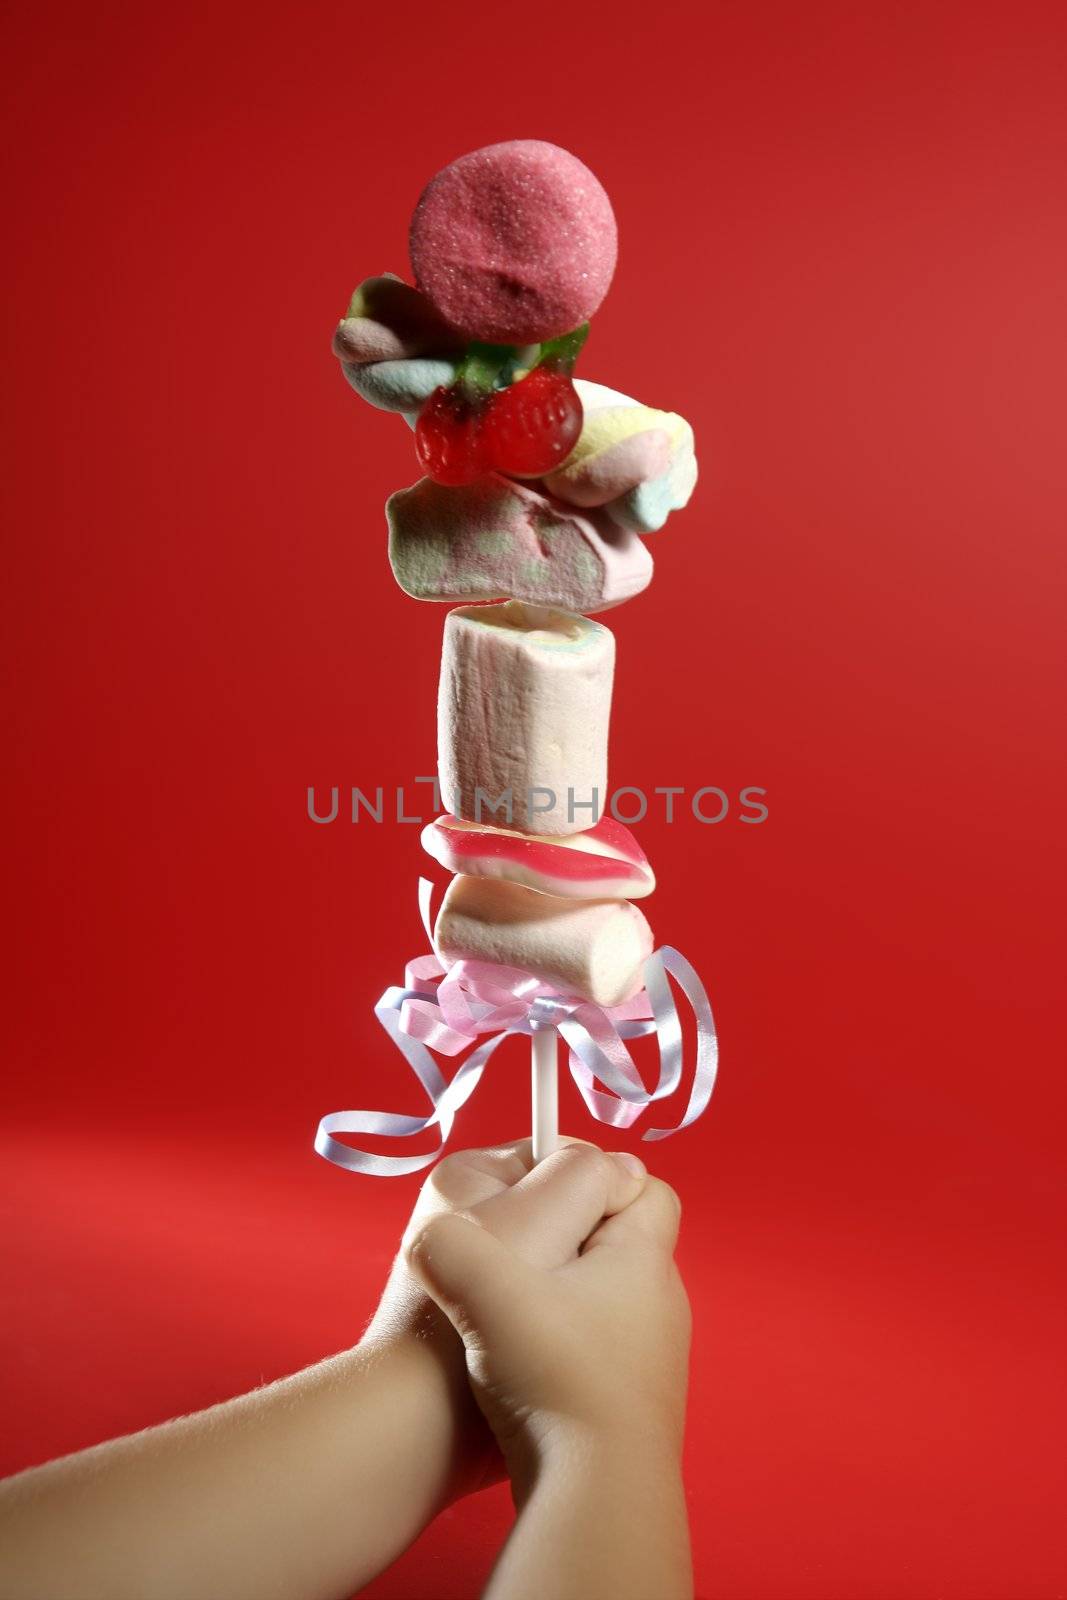 Candy colorful lollipop on child hand by lunamarina